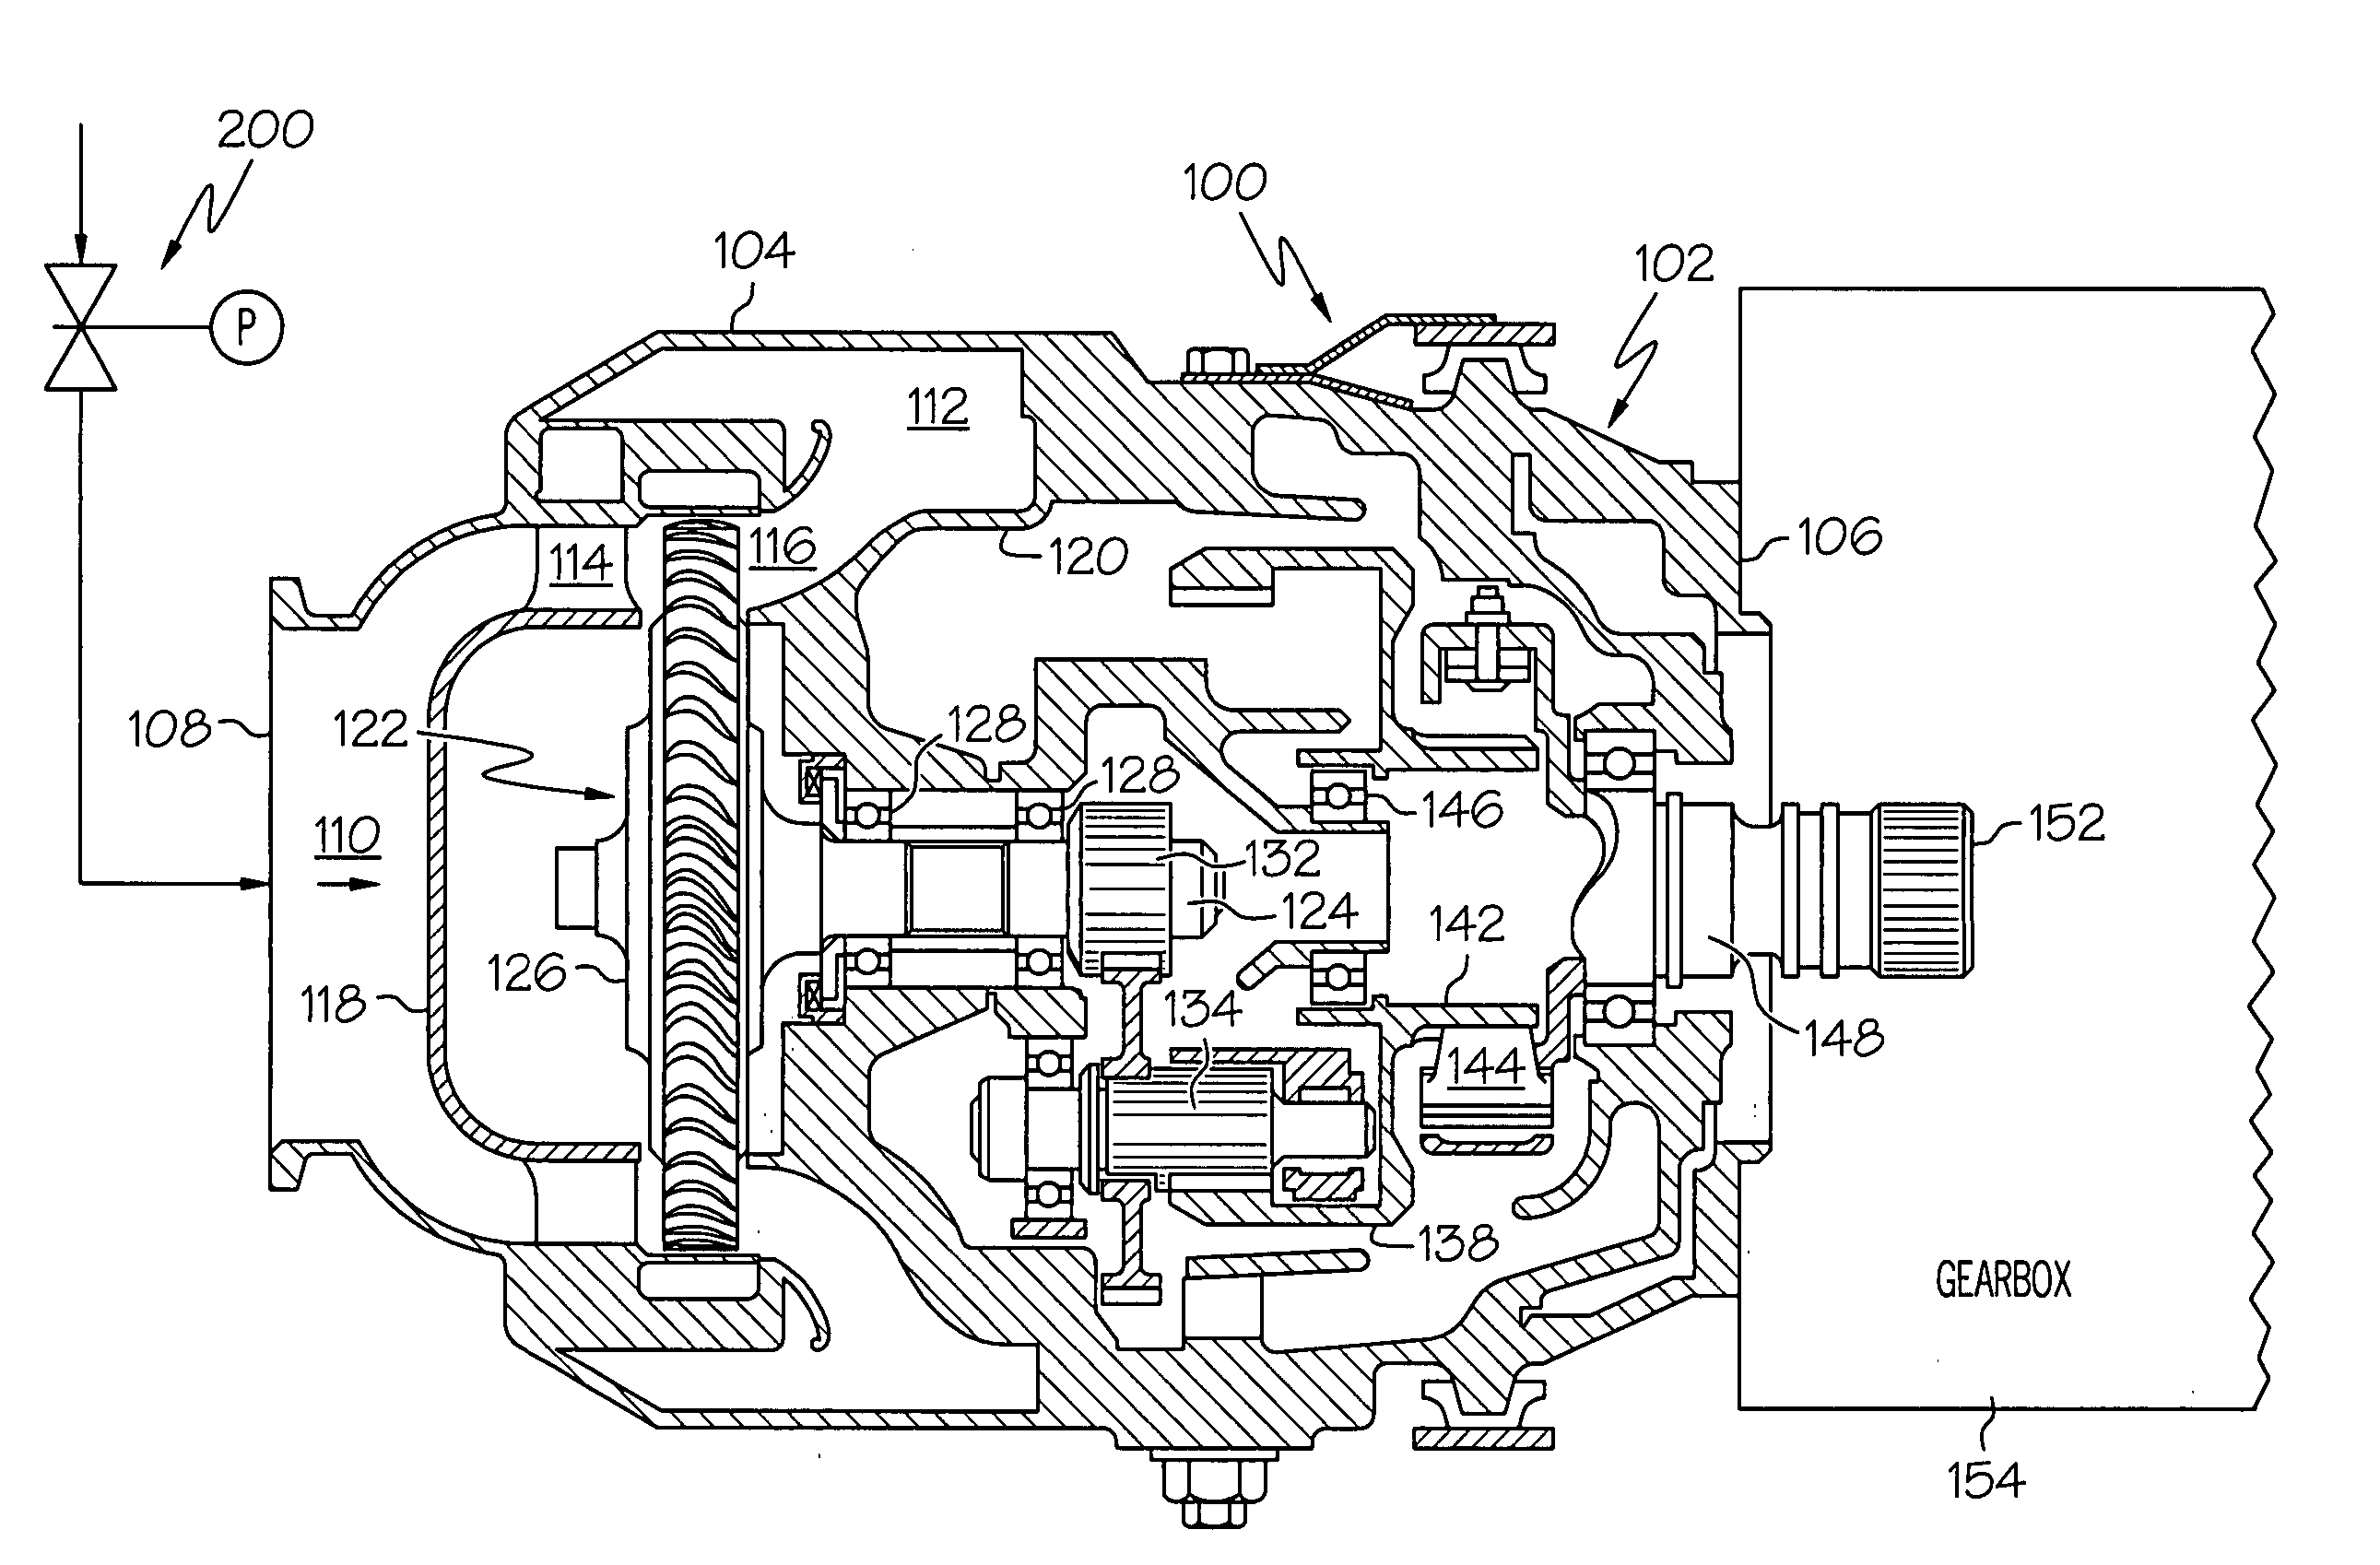 Pneumatic valve control using downstream pressure feedback and an air turbine starter incorporating the same